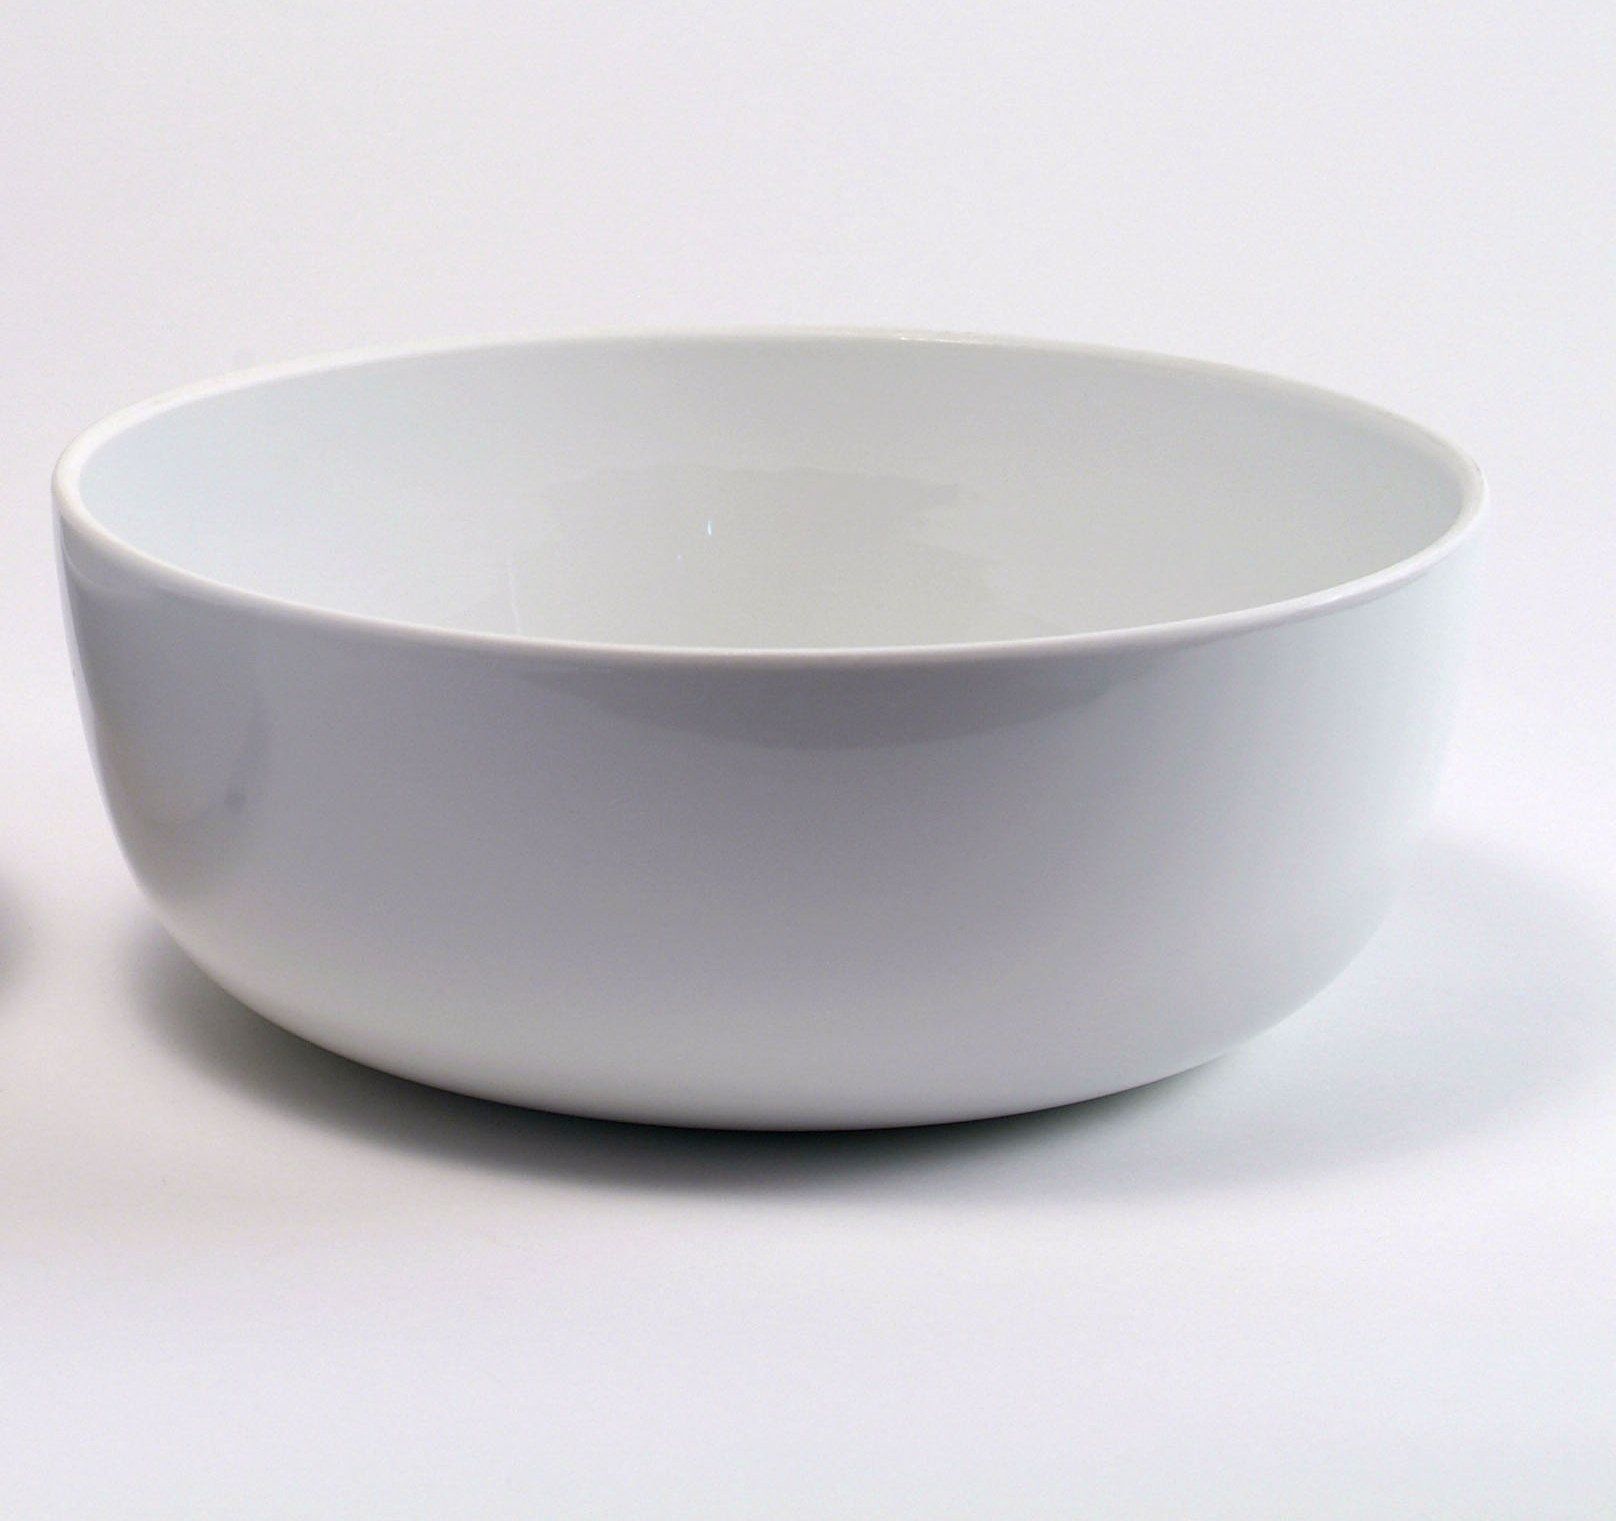 Salad Bowl Hire Return Clean or Dirty Option Available